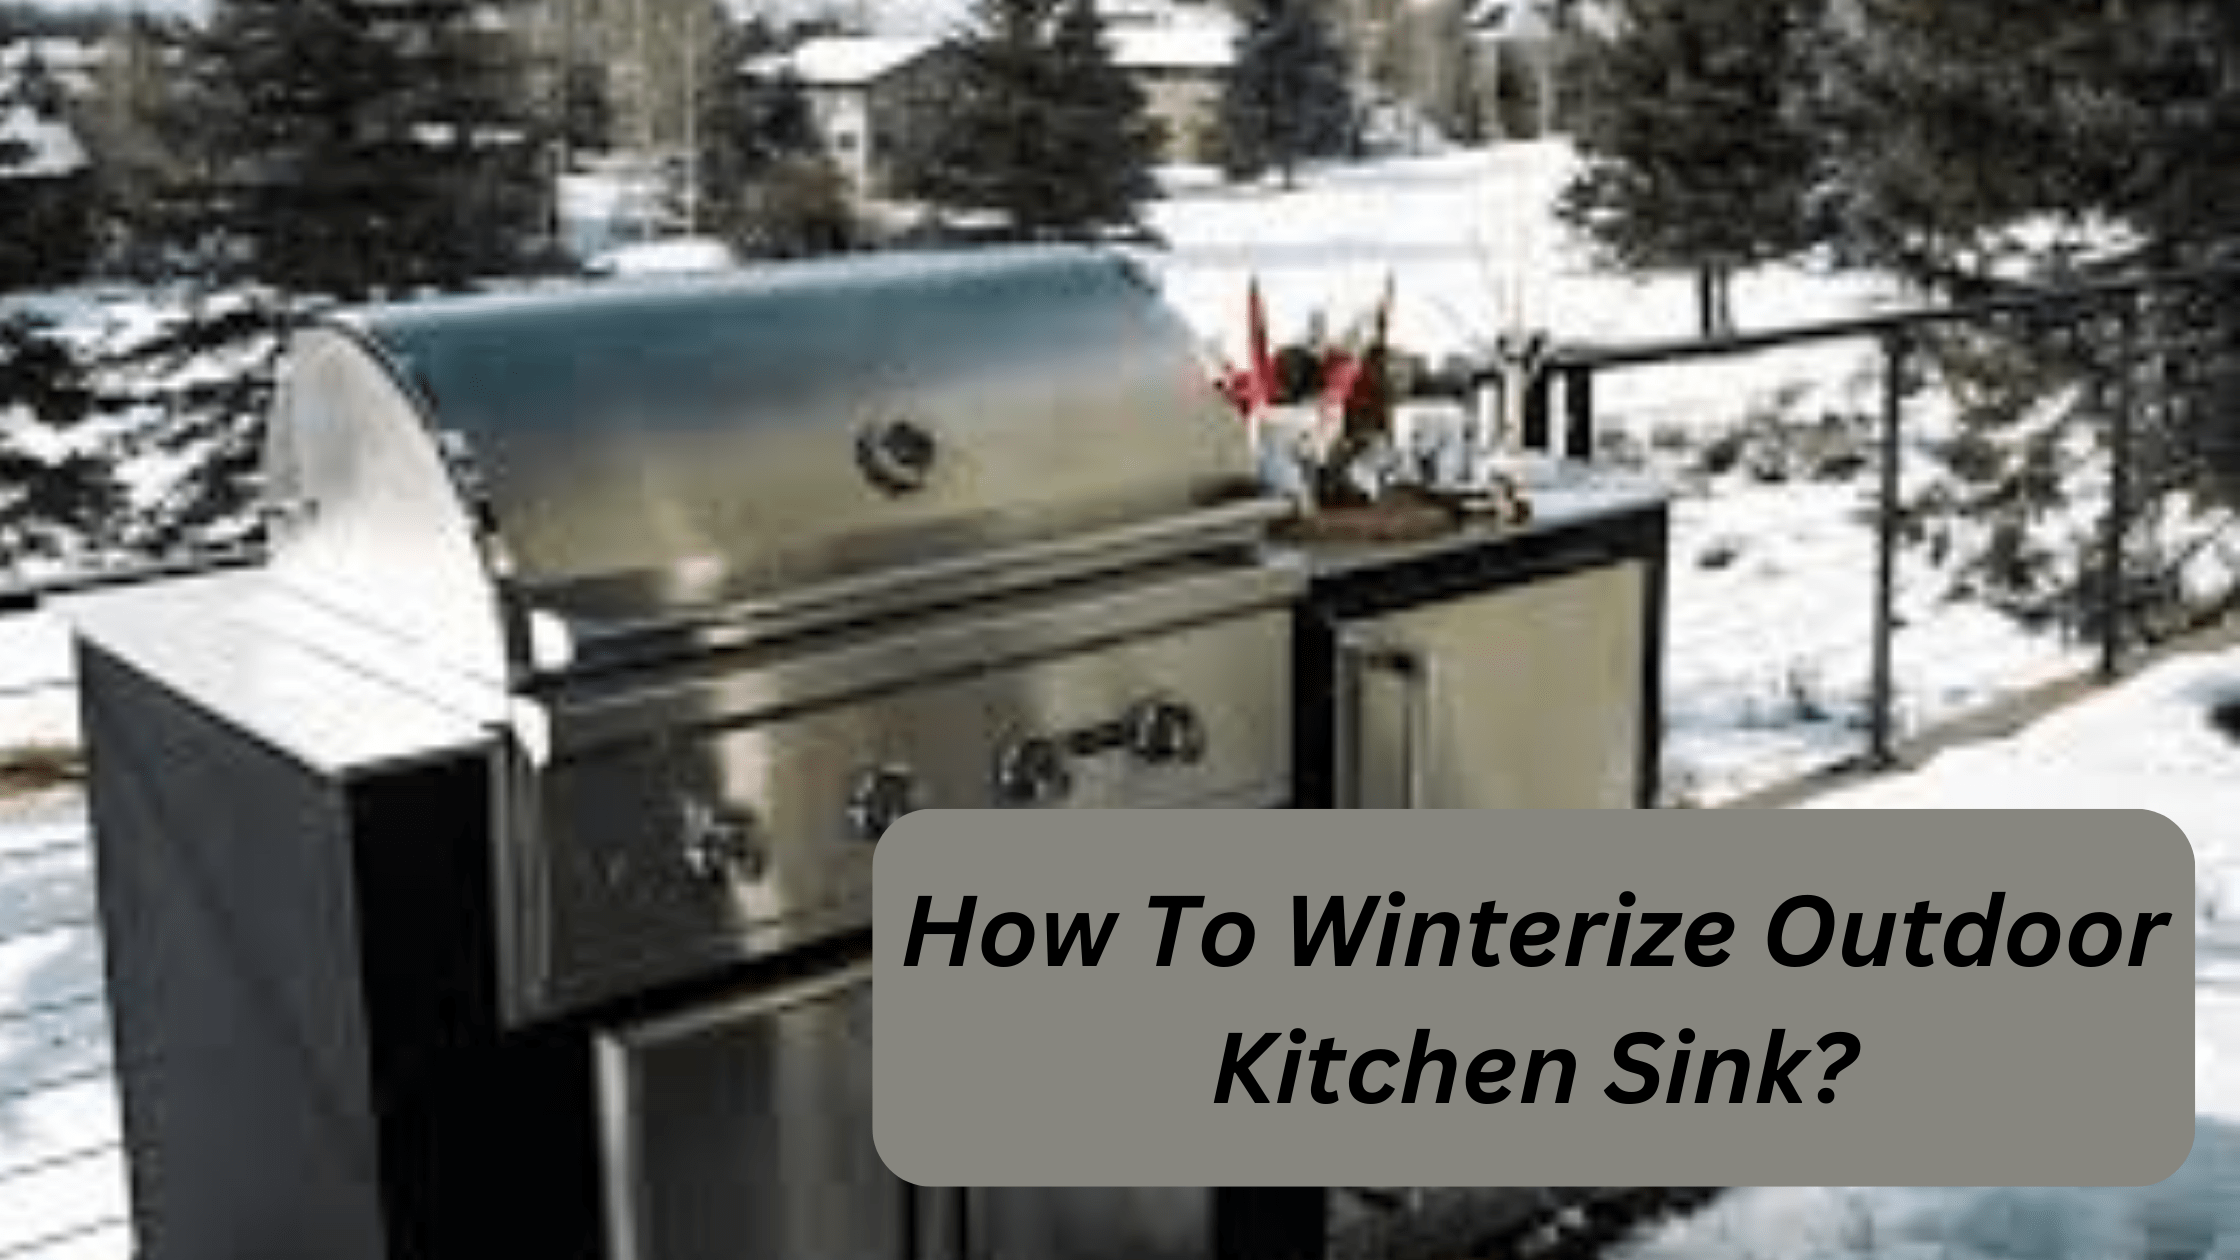 How To Winterize Outdoor Kitchen Sink?